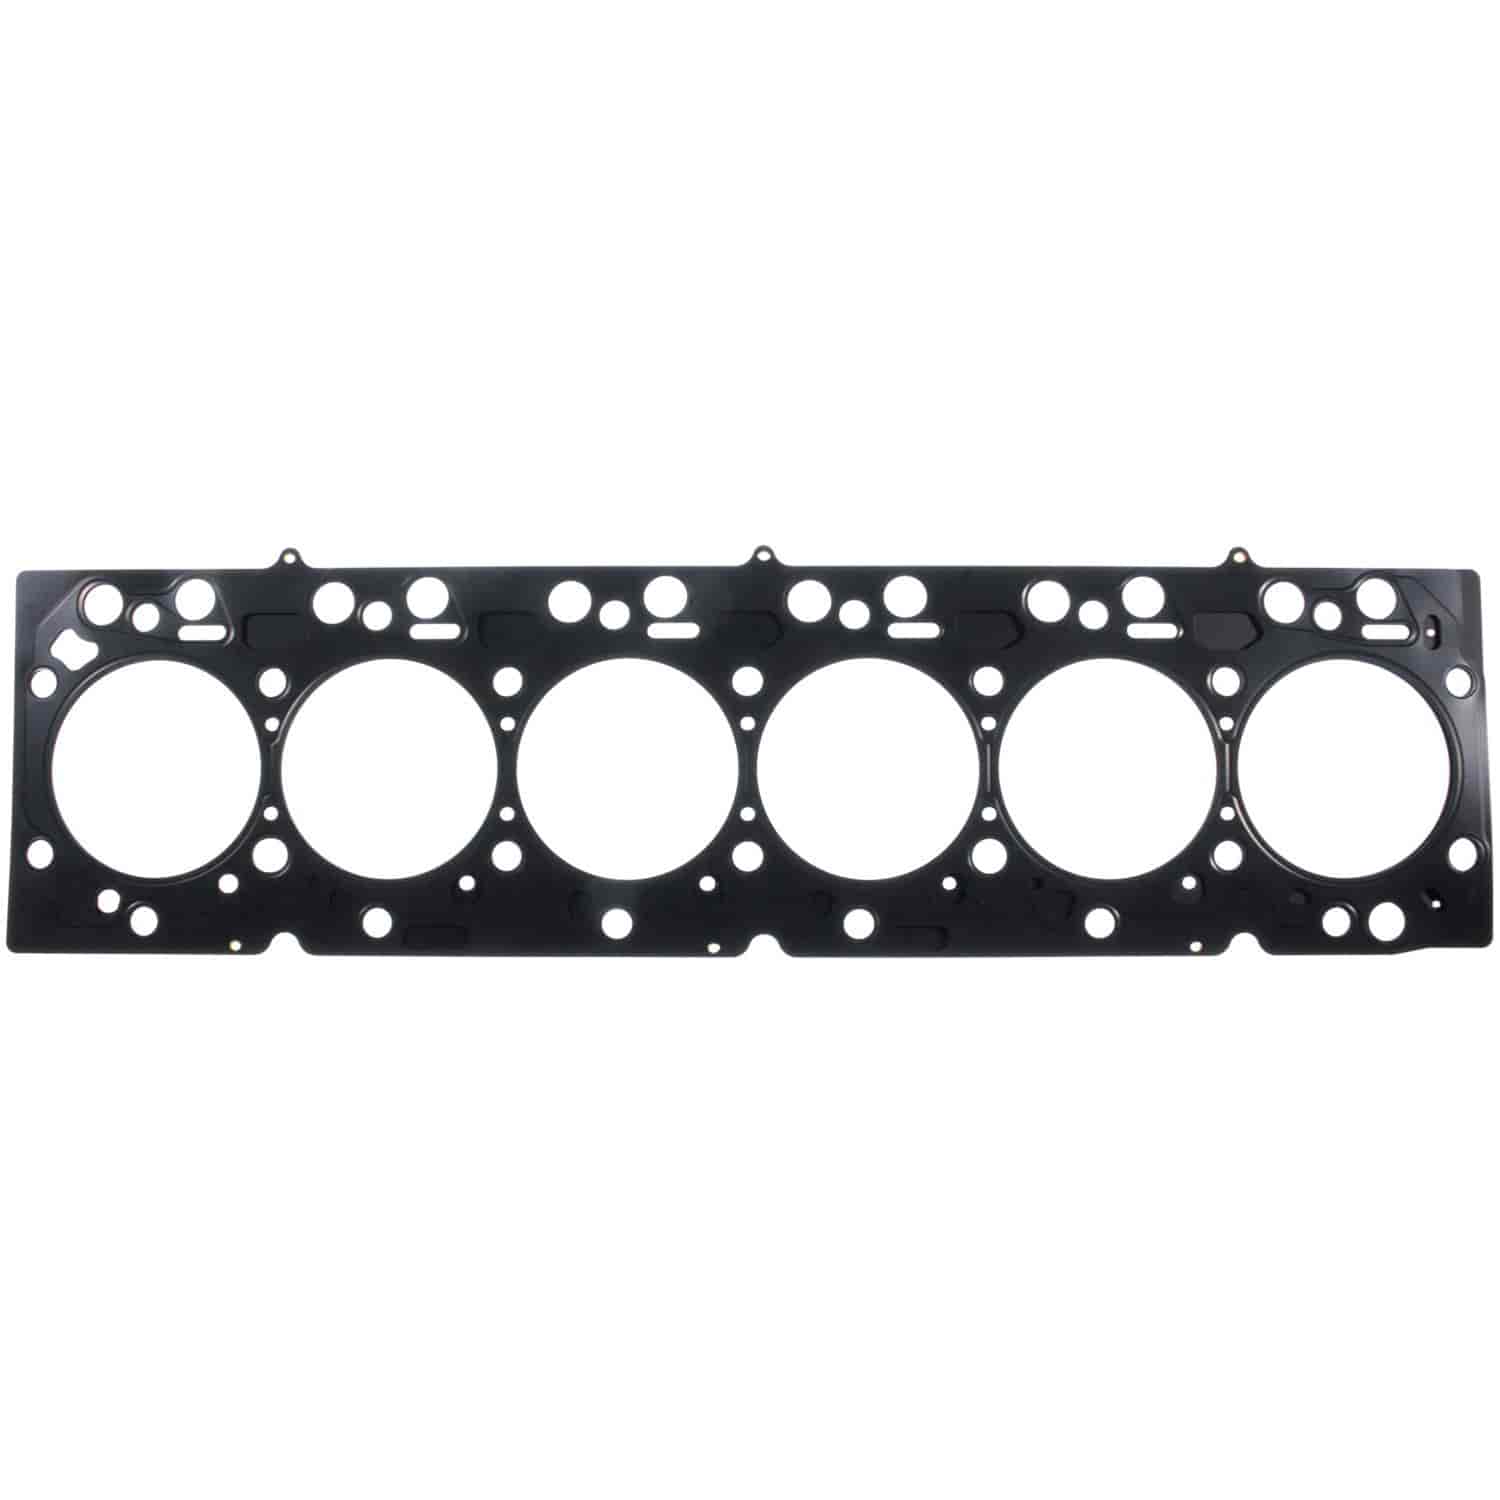 Cylinder Head Gasket for Cummins 6.7L B Series Engines used in Dodge Truck Applications